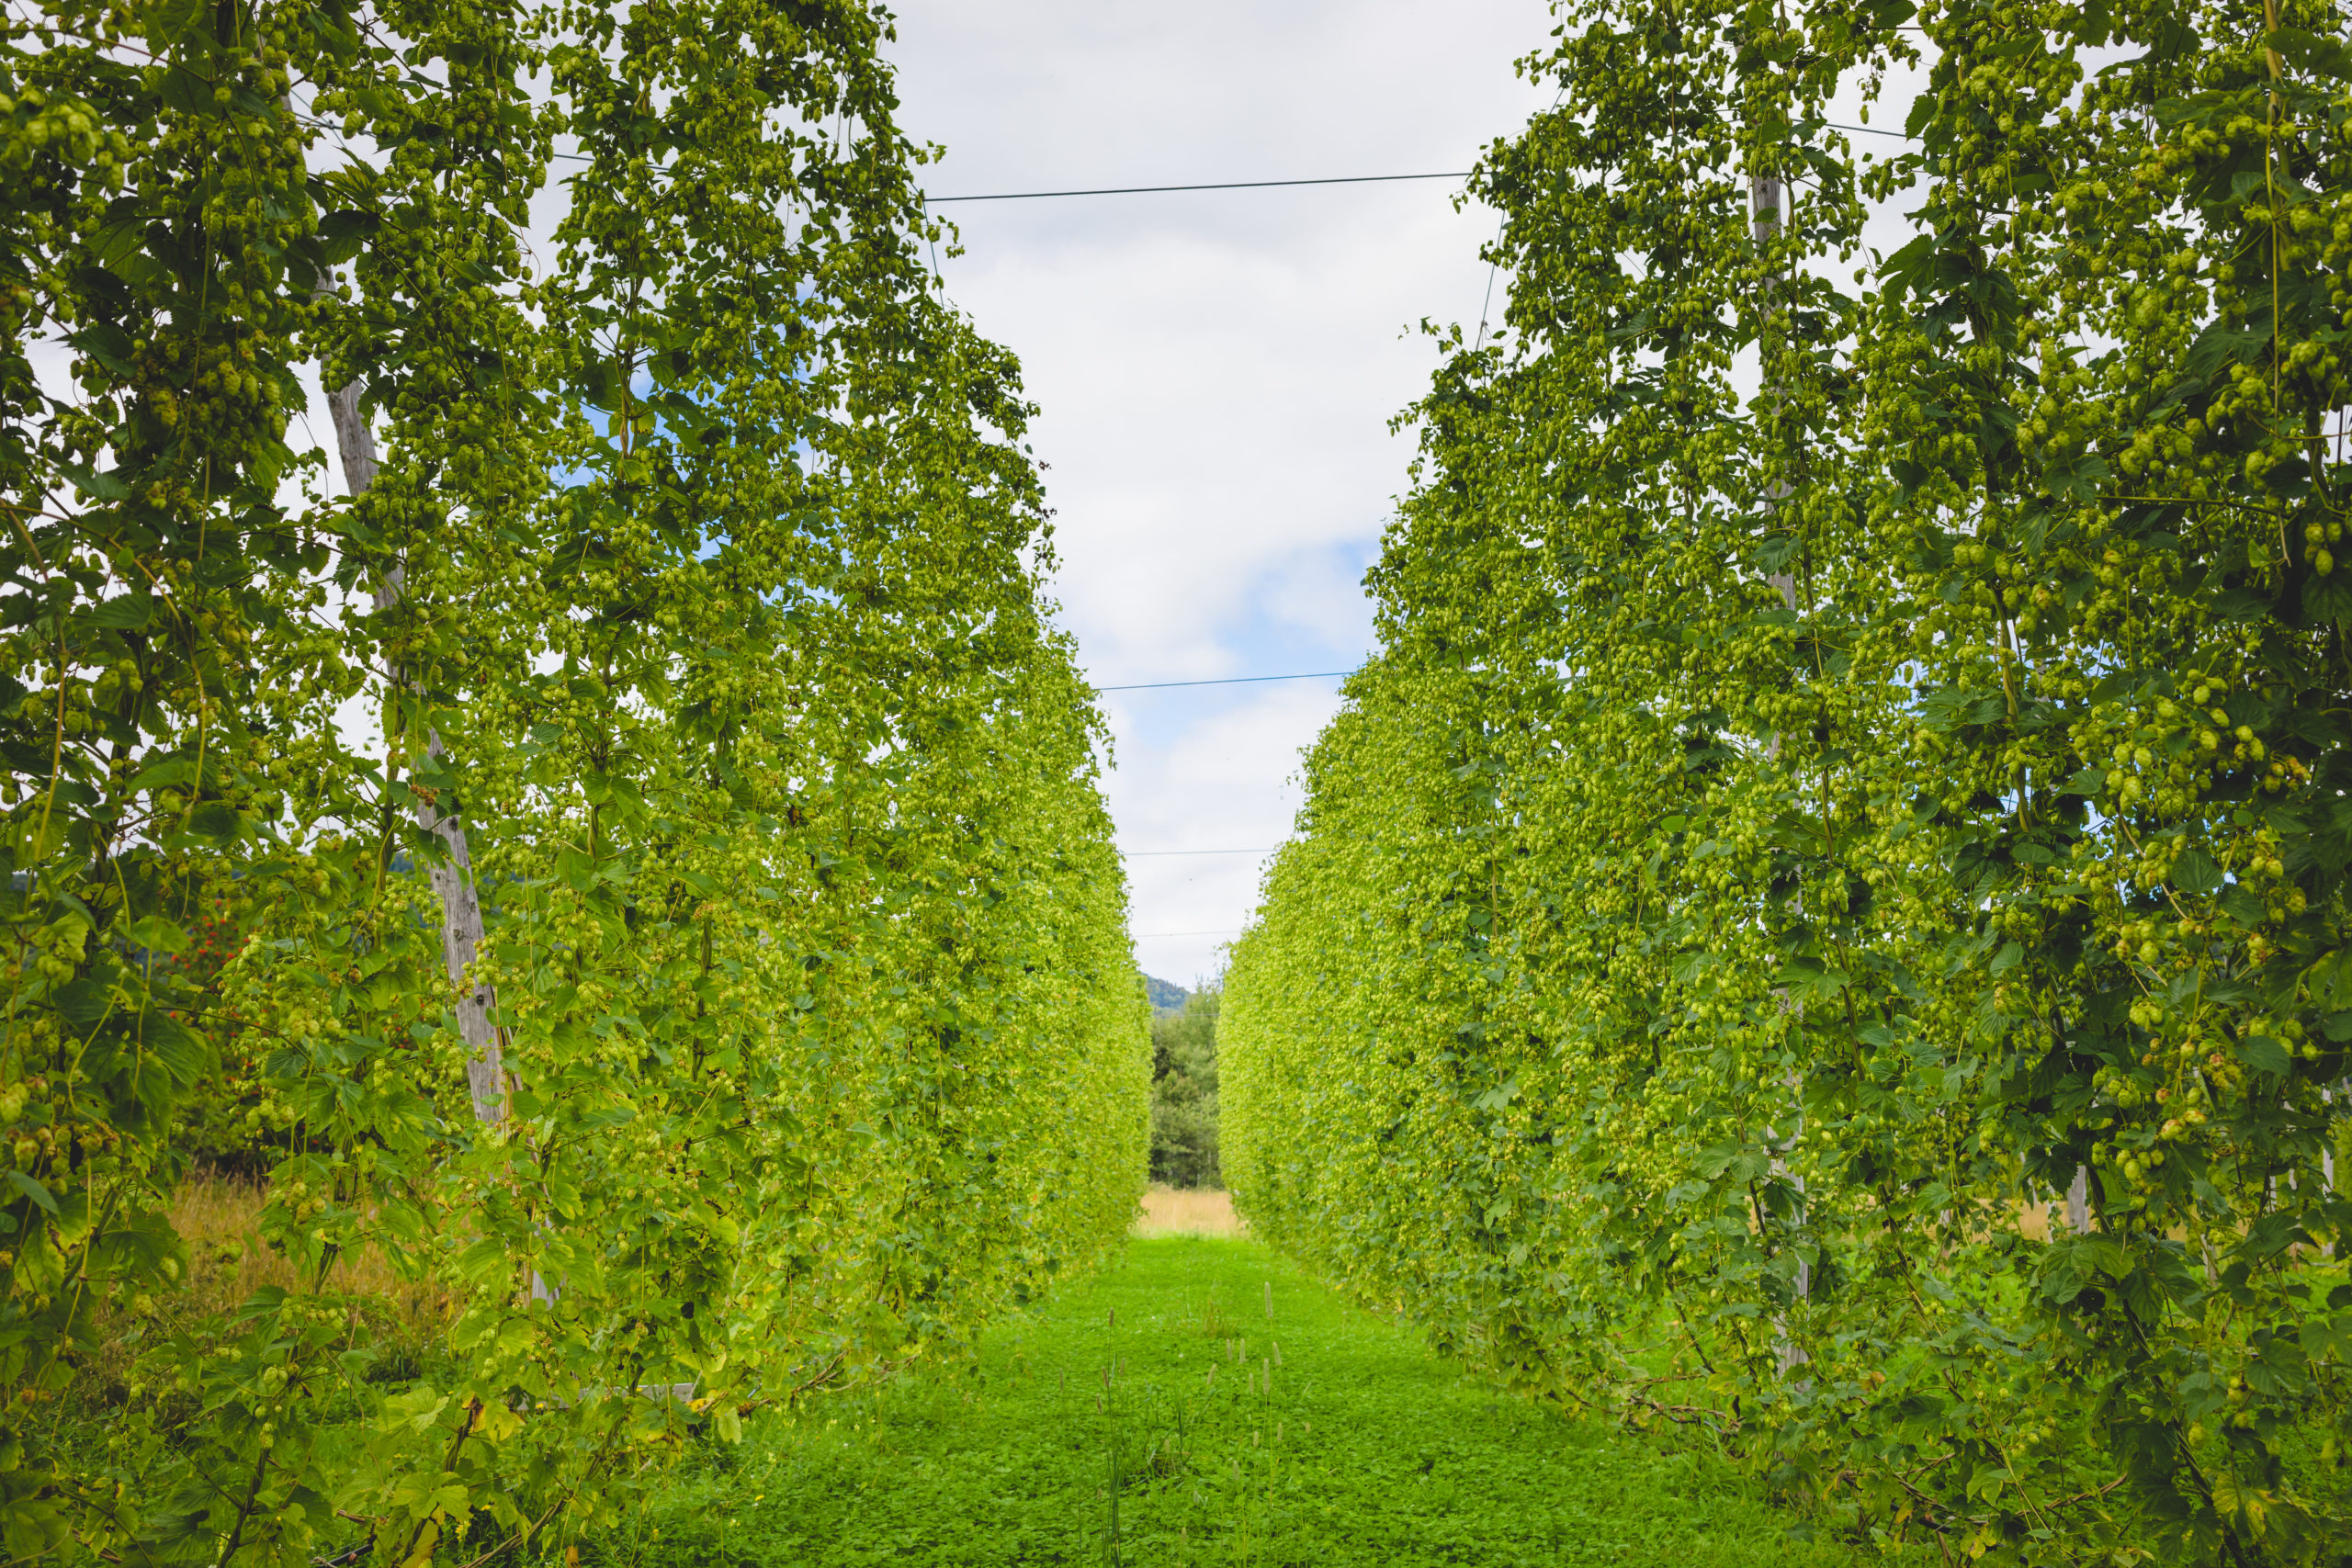 View to green hop field with tied plants prepared for harvesting.